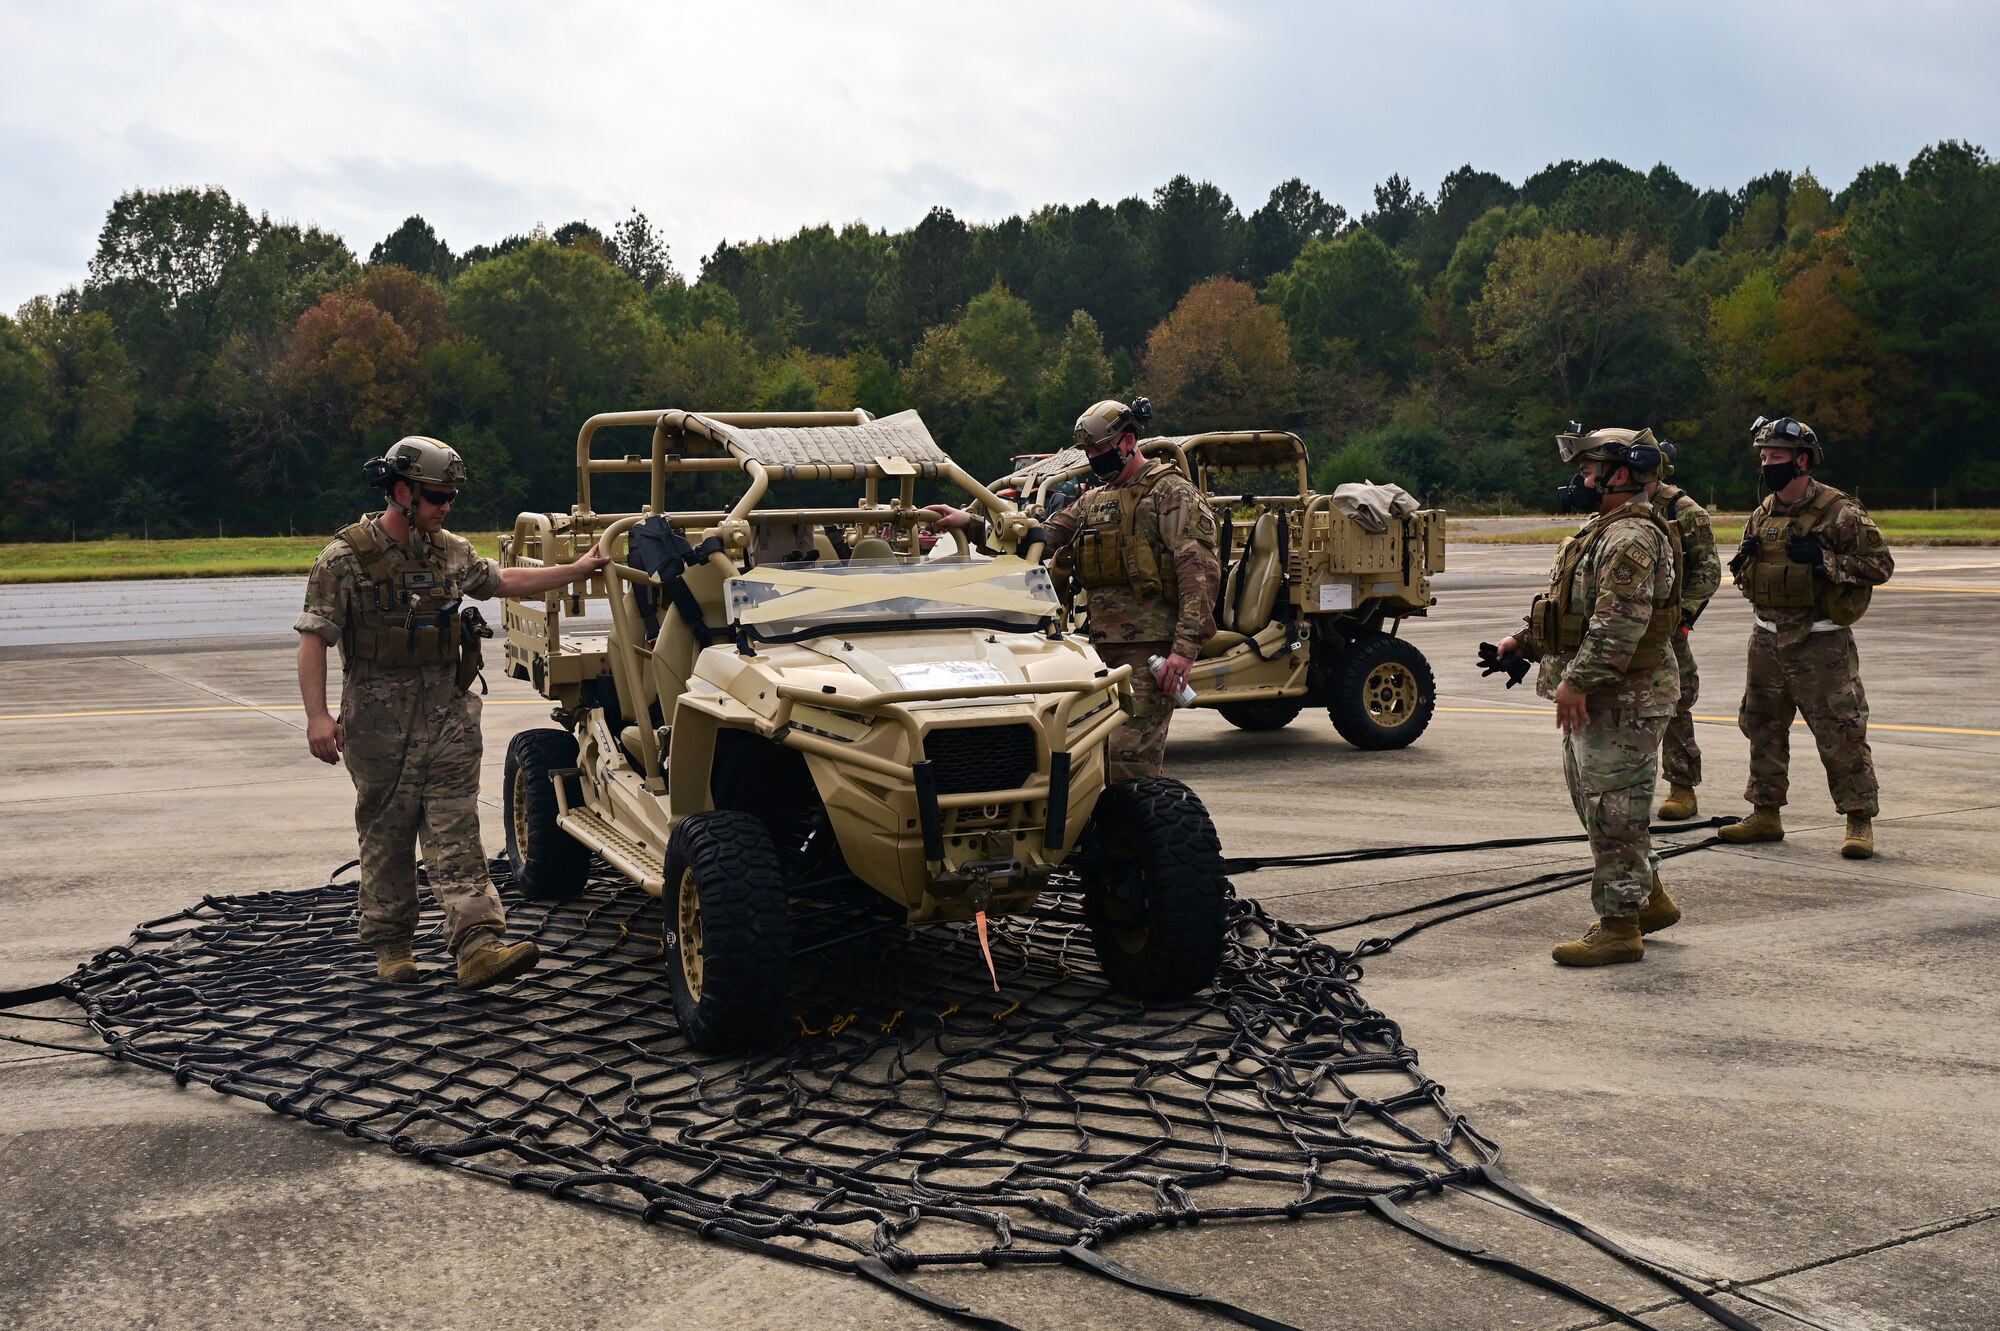 4 Airmen inspect an offroad vehicle that has just been released form a net.